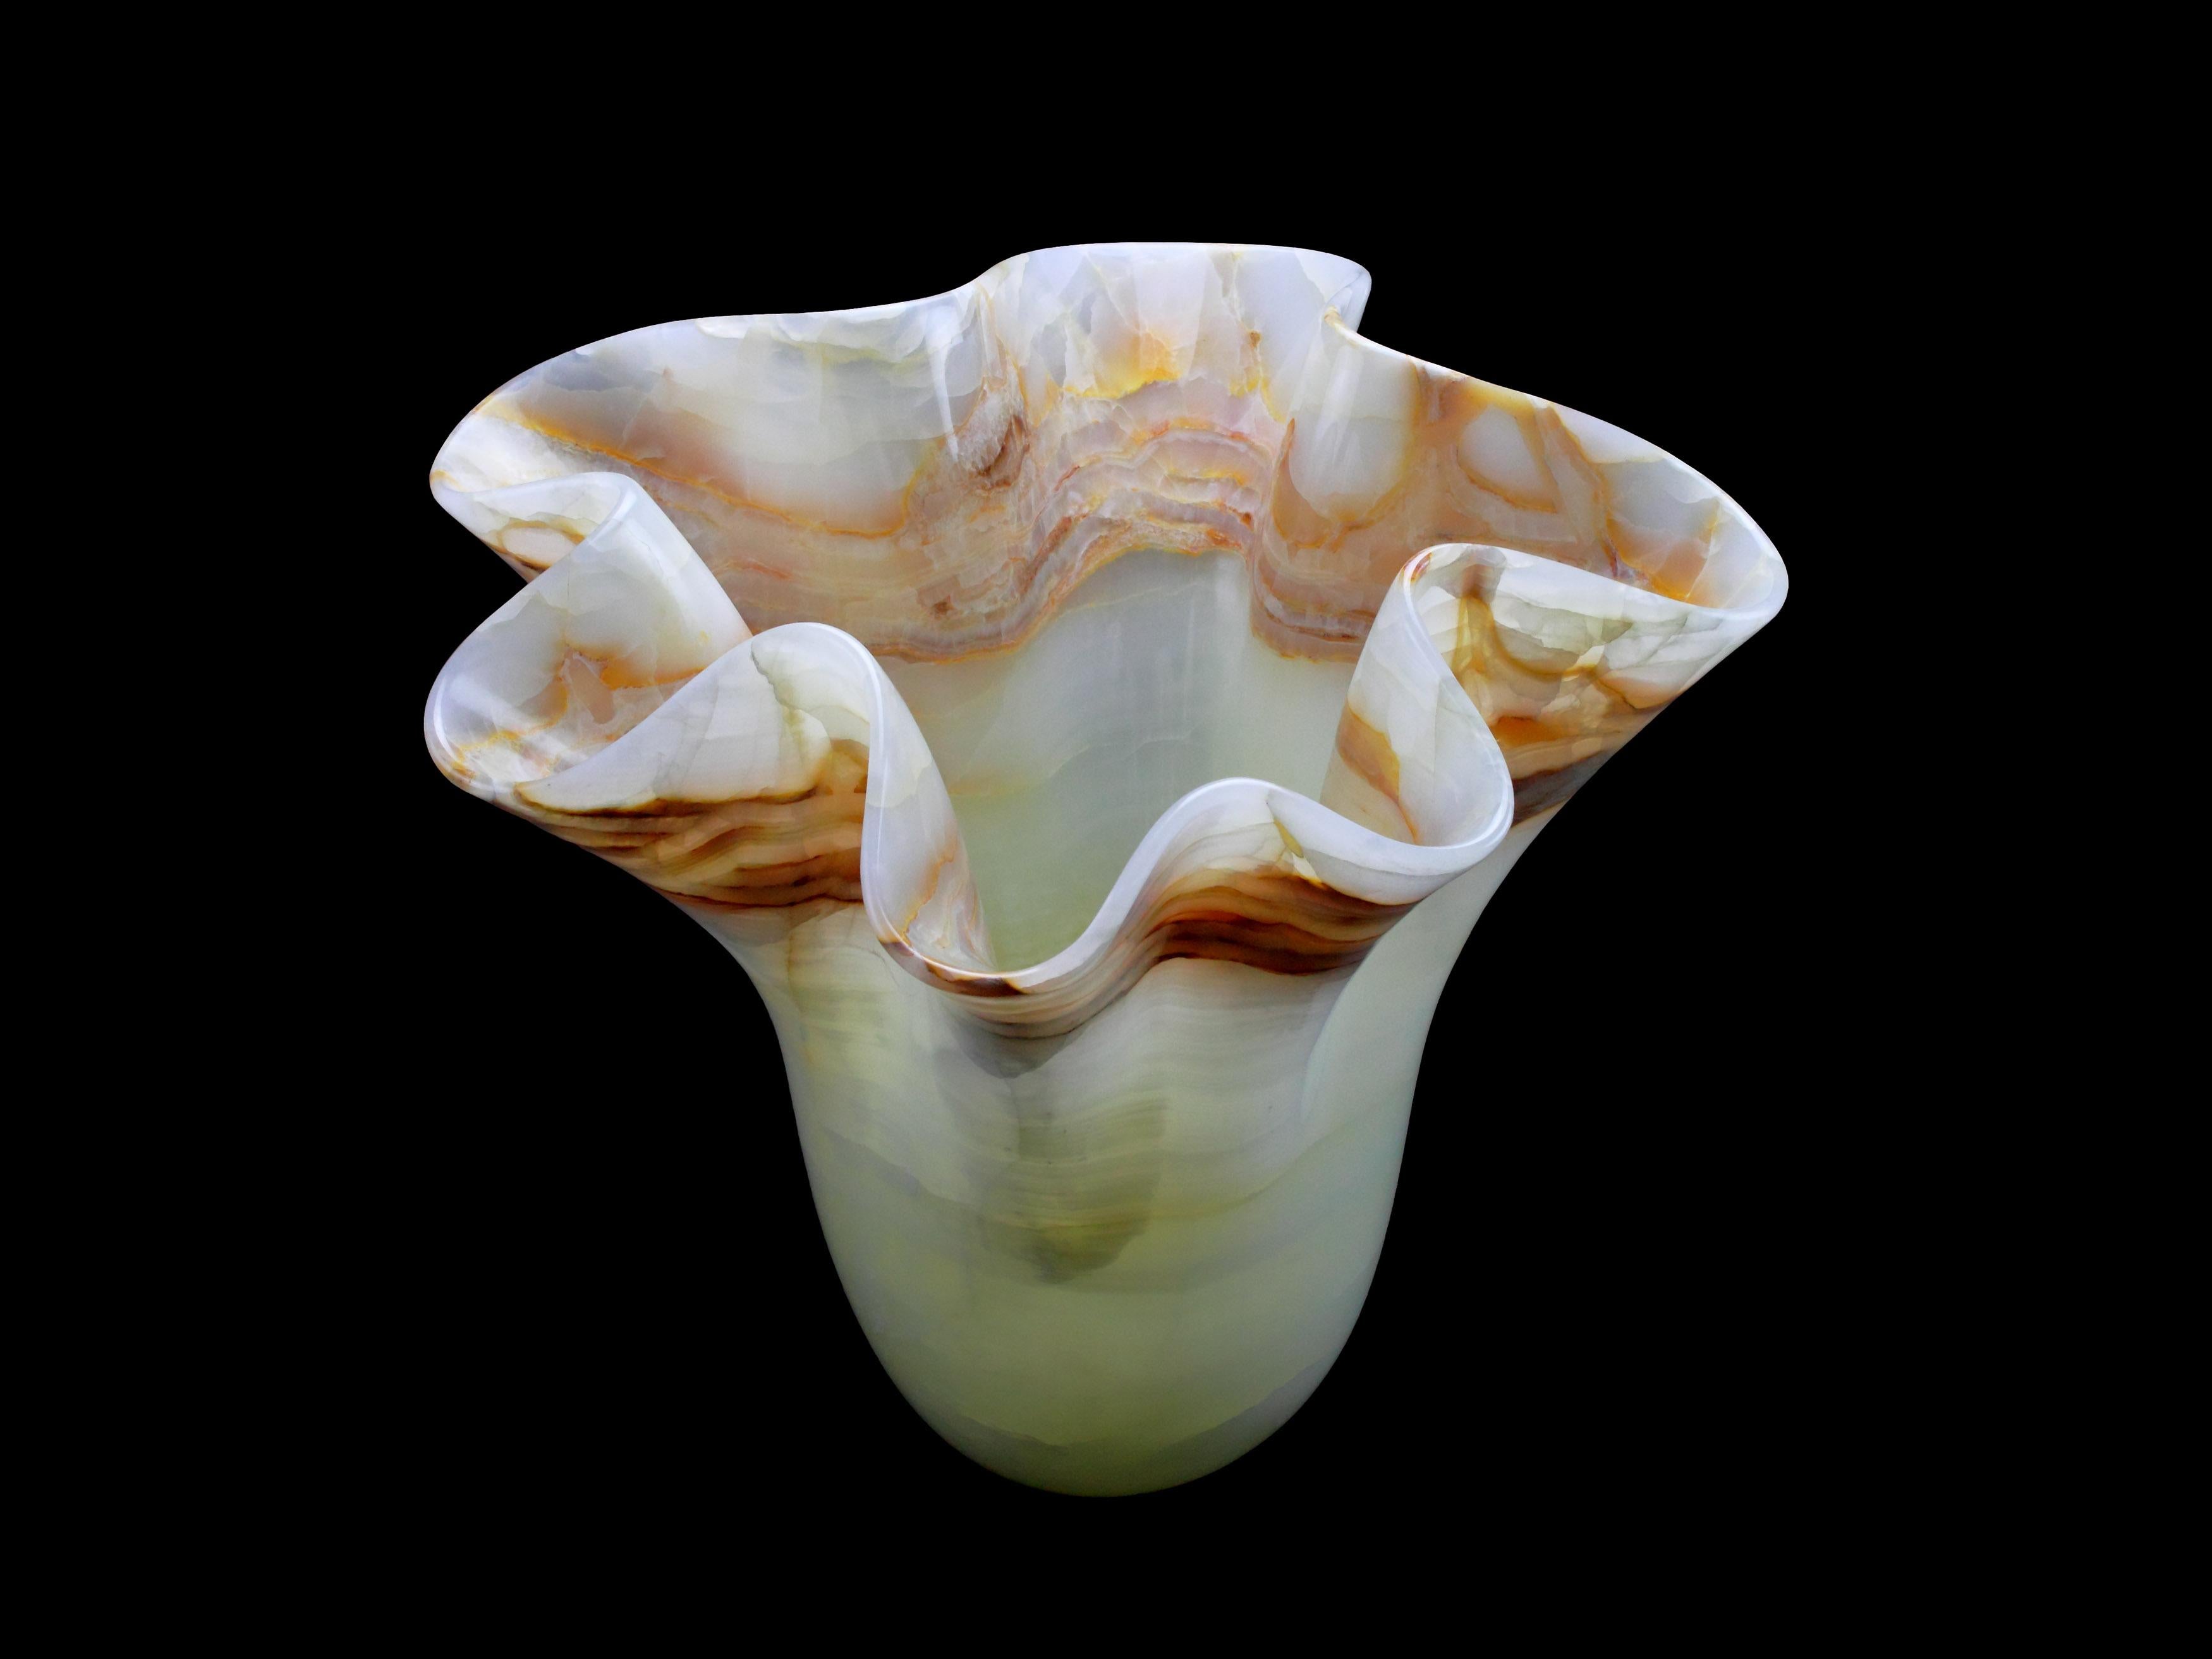 Vase Vessel Sculpture Organic Shape White Onyx Marble Collectible Design Italy For Sale 7